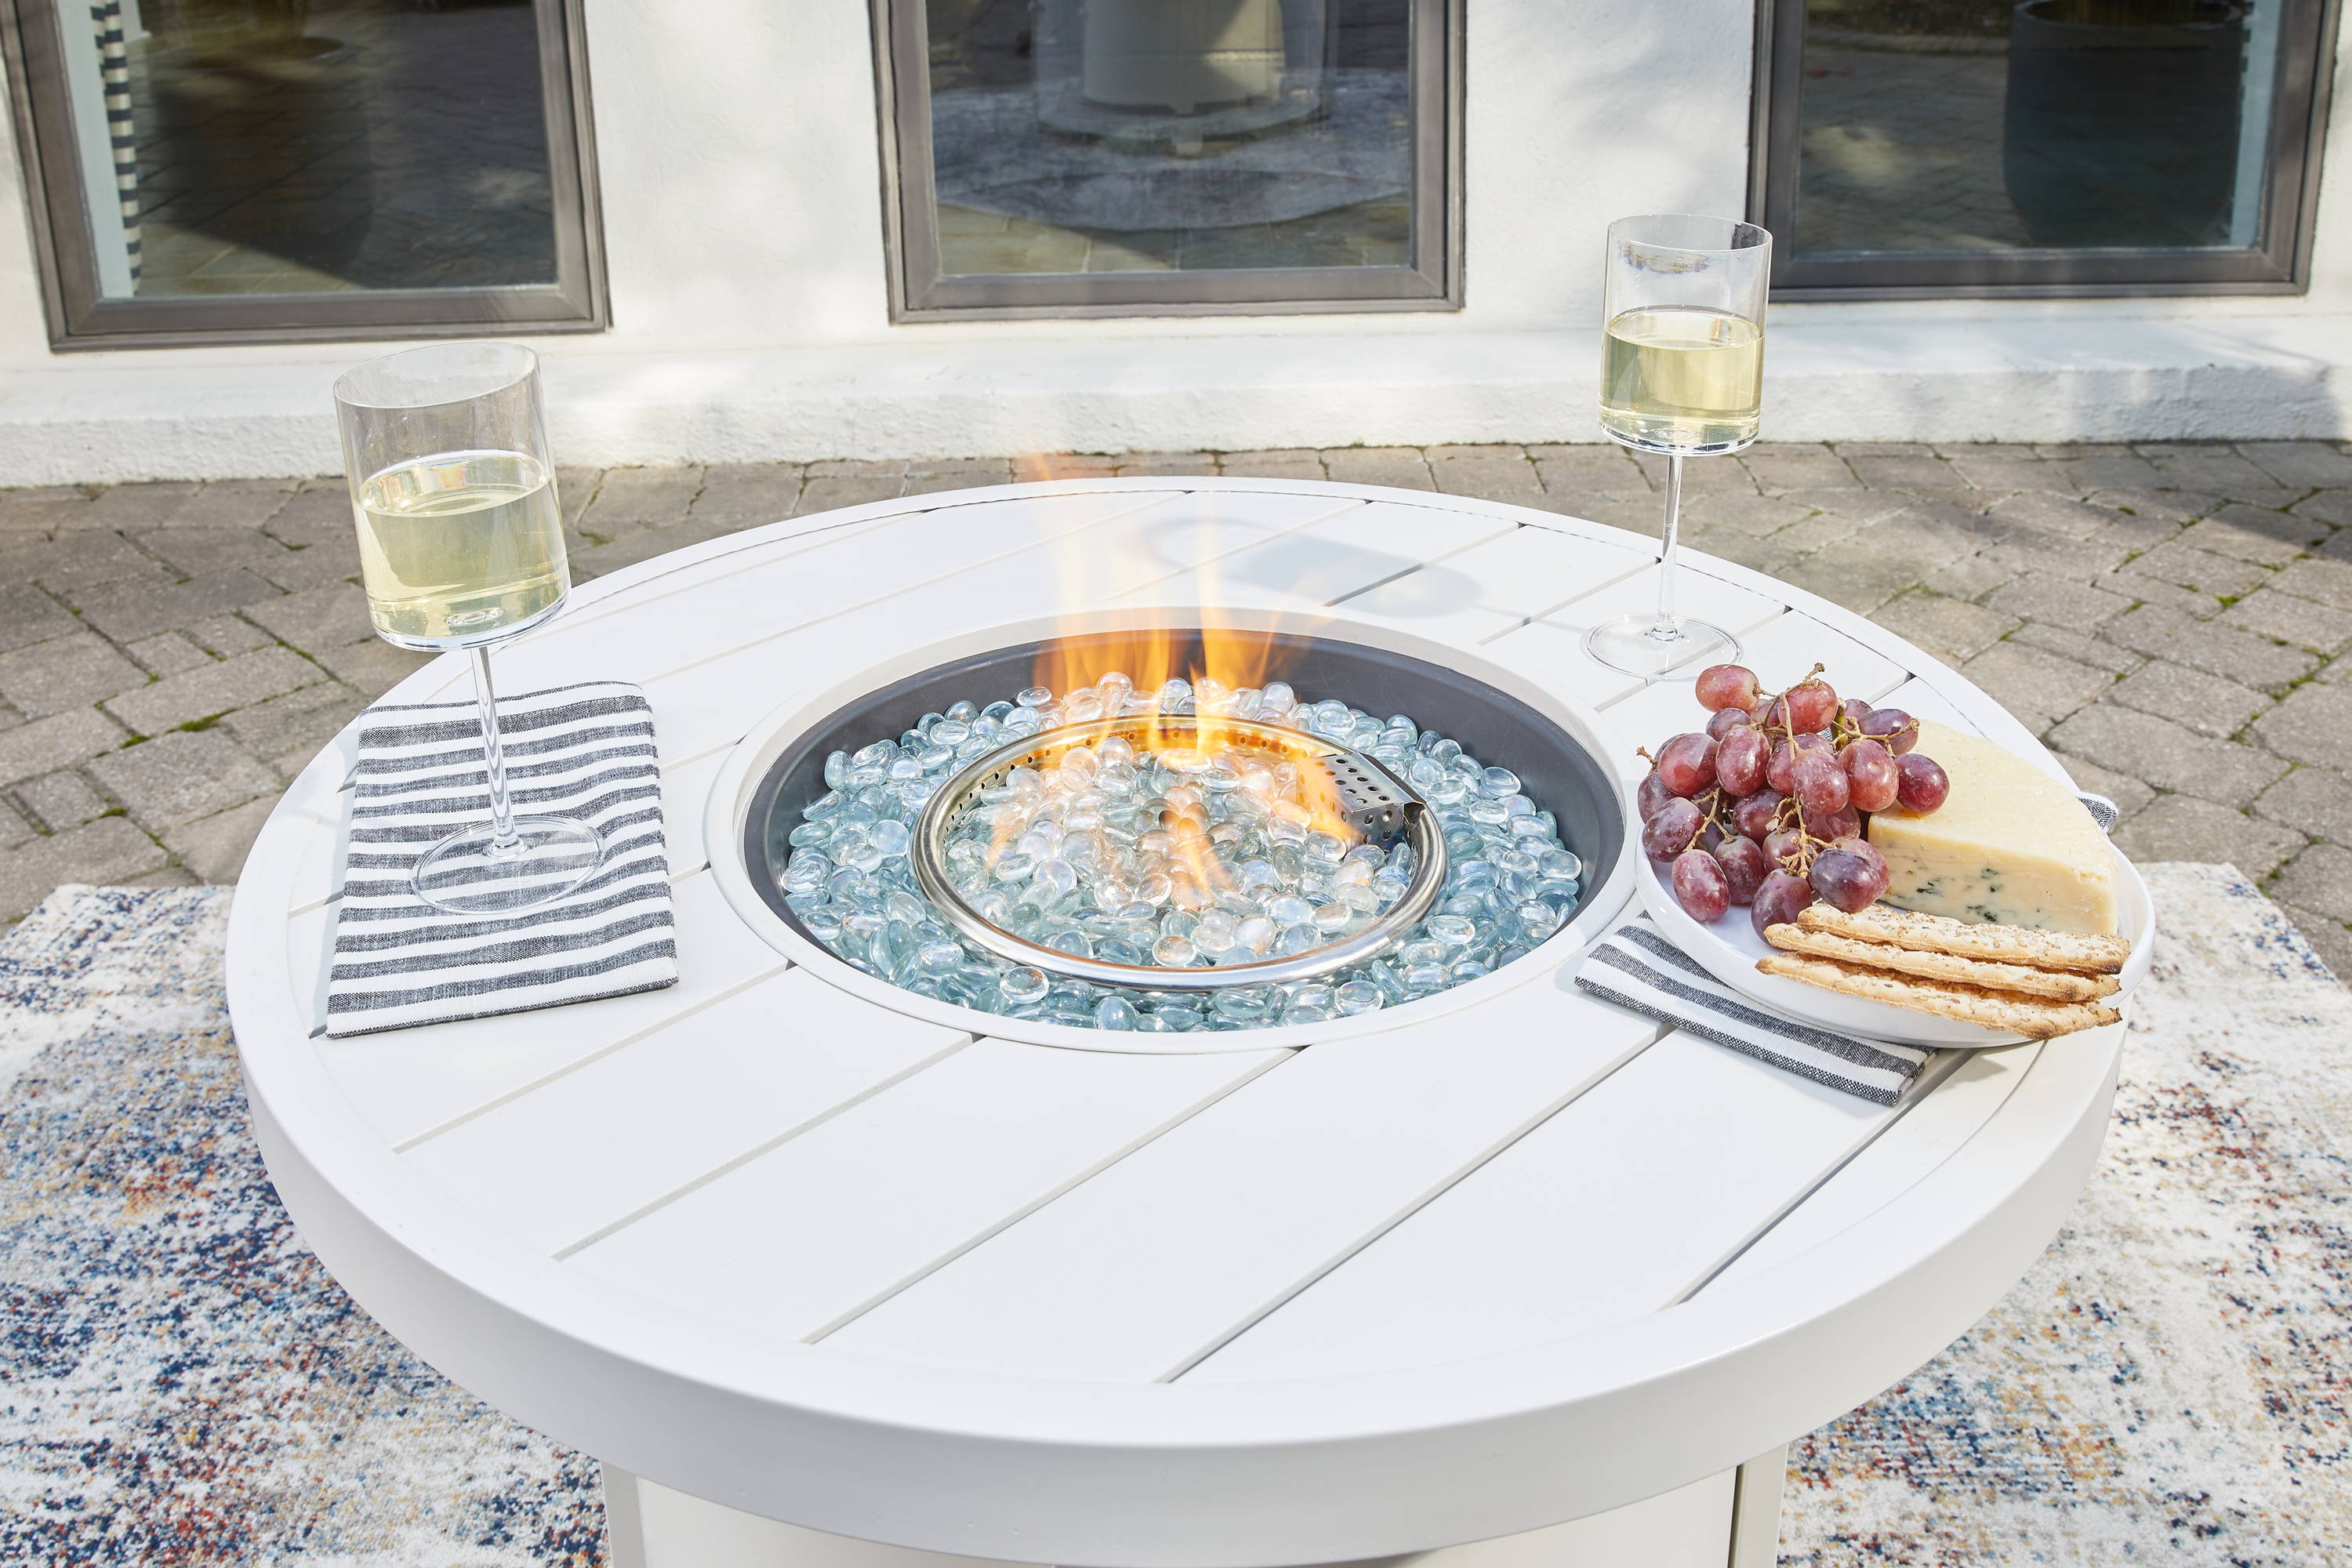 A white fire pit tables holds two champagne glasses and a bowl of grapes.